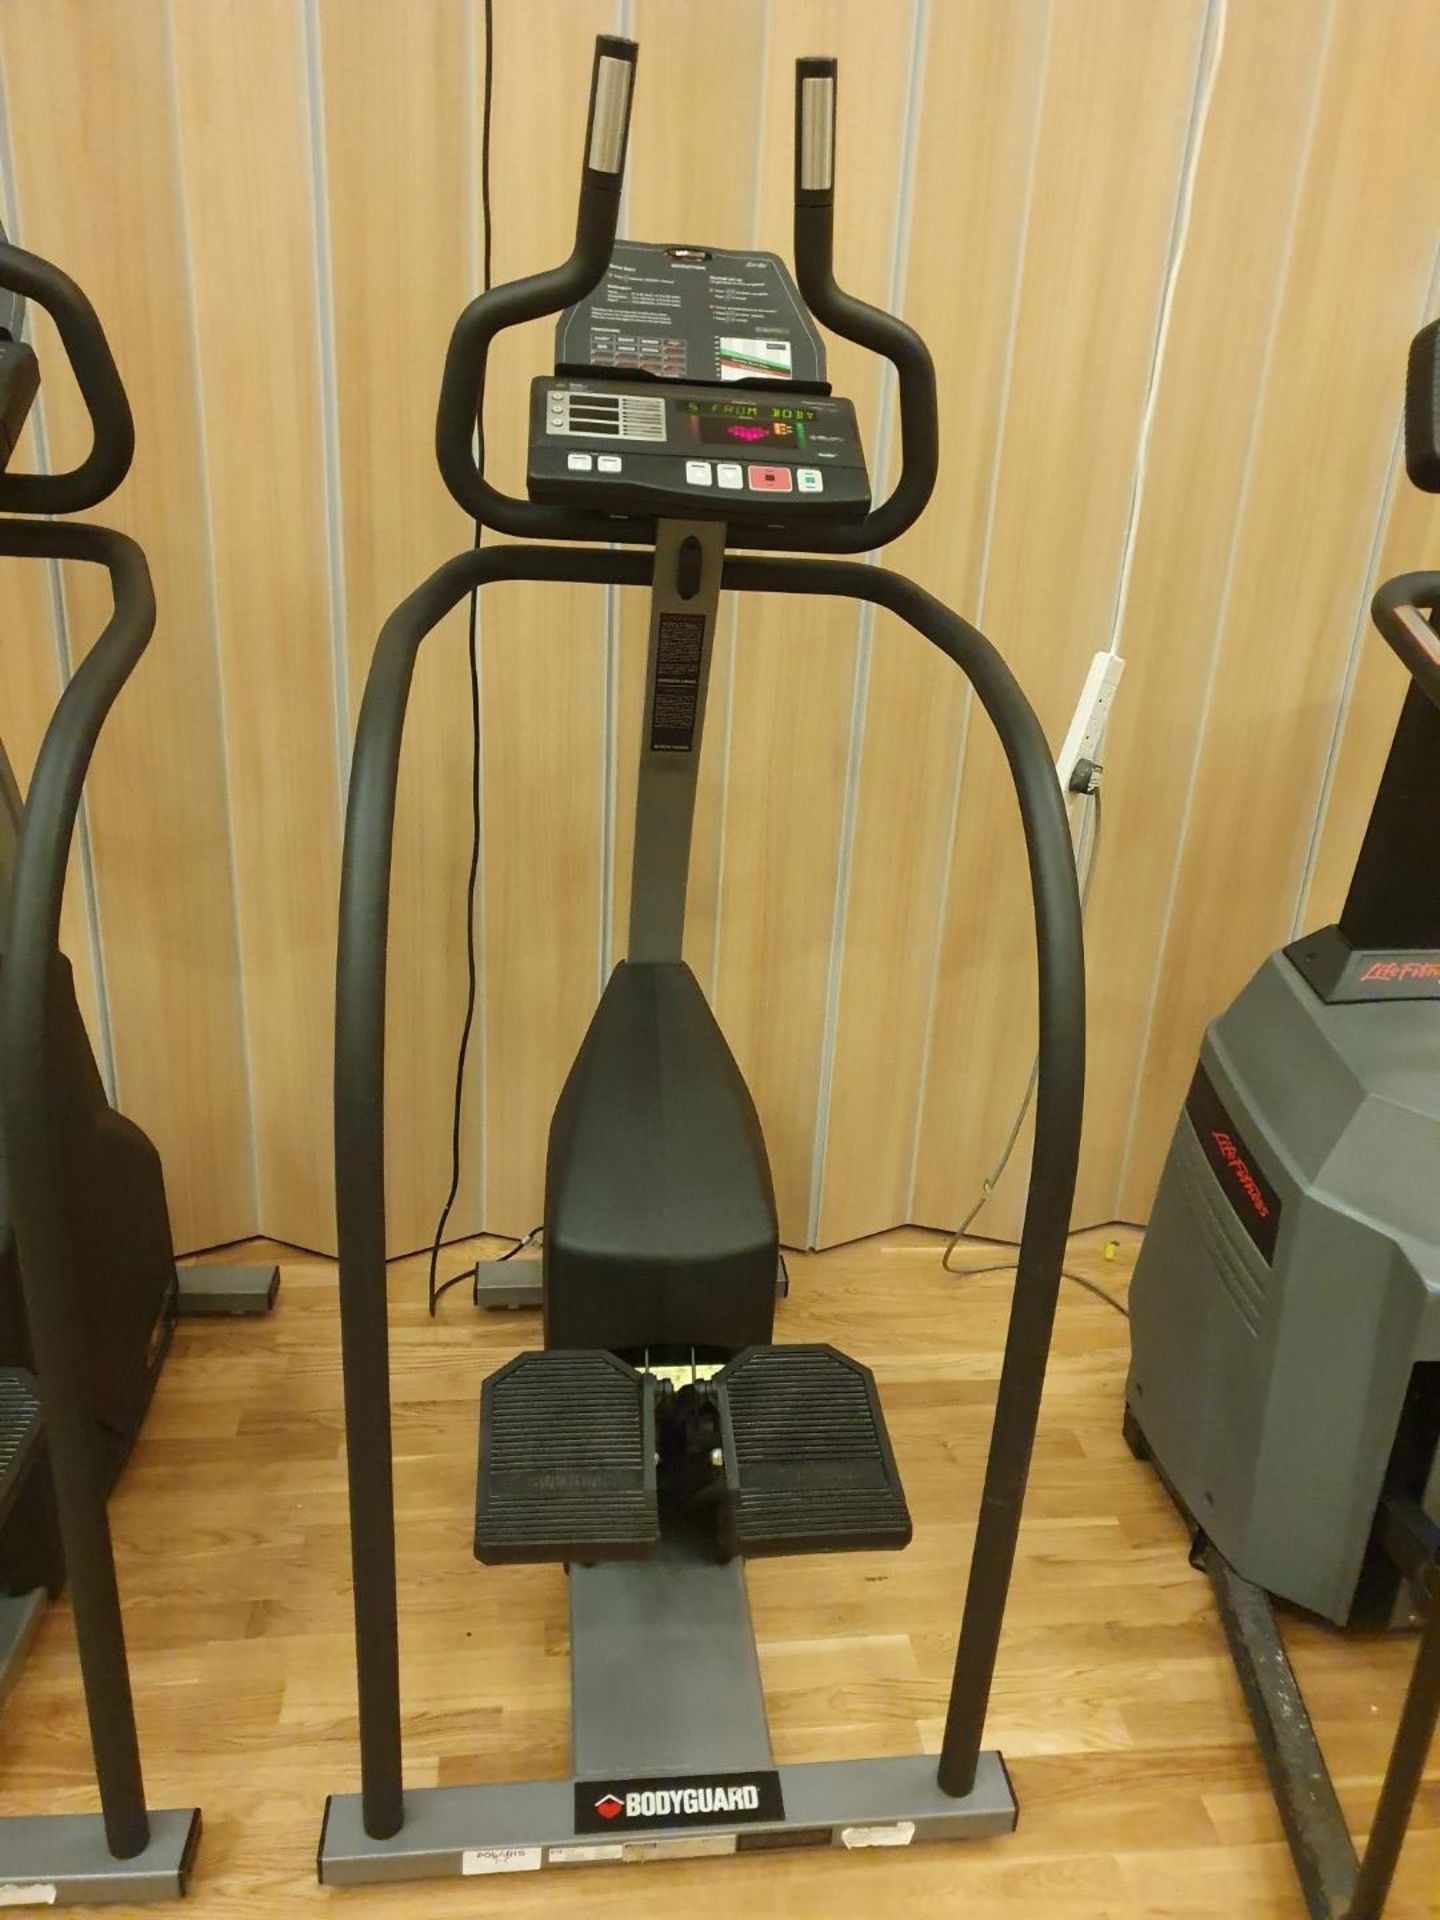 1 x Bodyguard Fitness Stepper - Part No F97420120 - CL552 - Location: West Yorkshire - Image 2 of 6